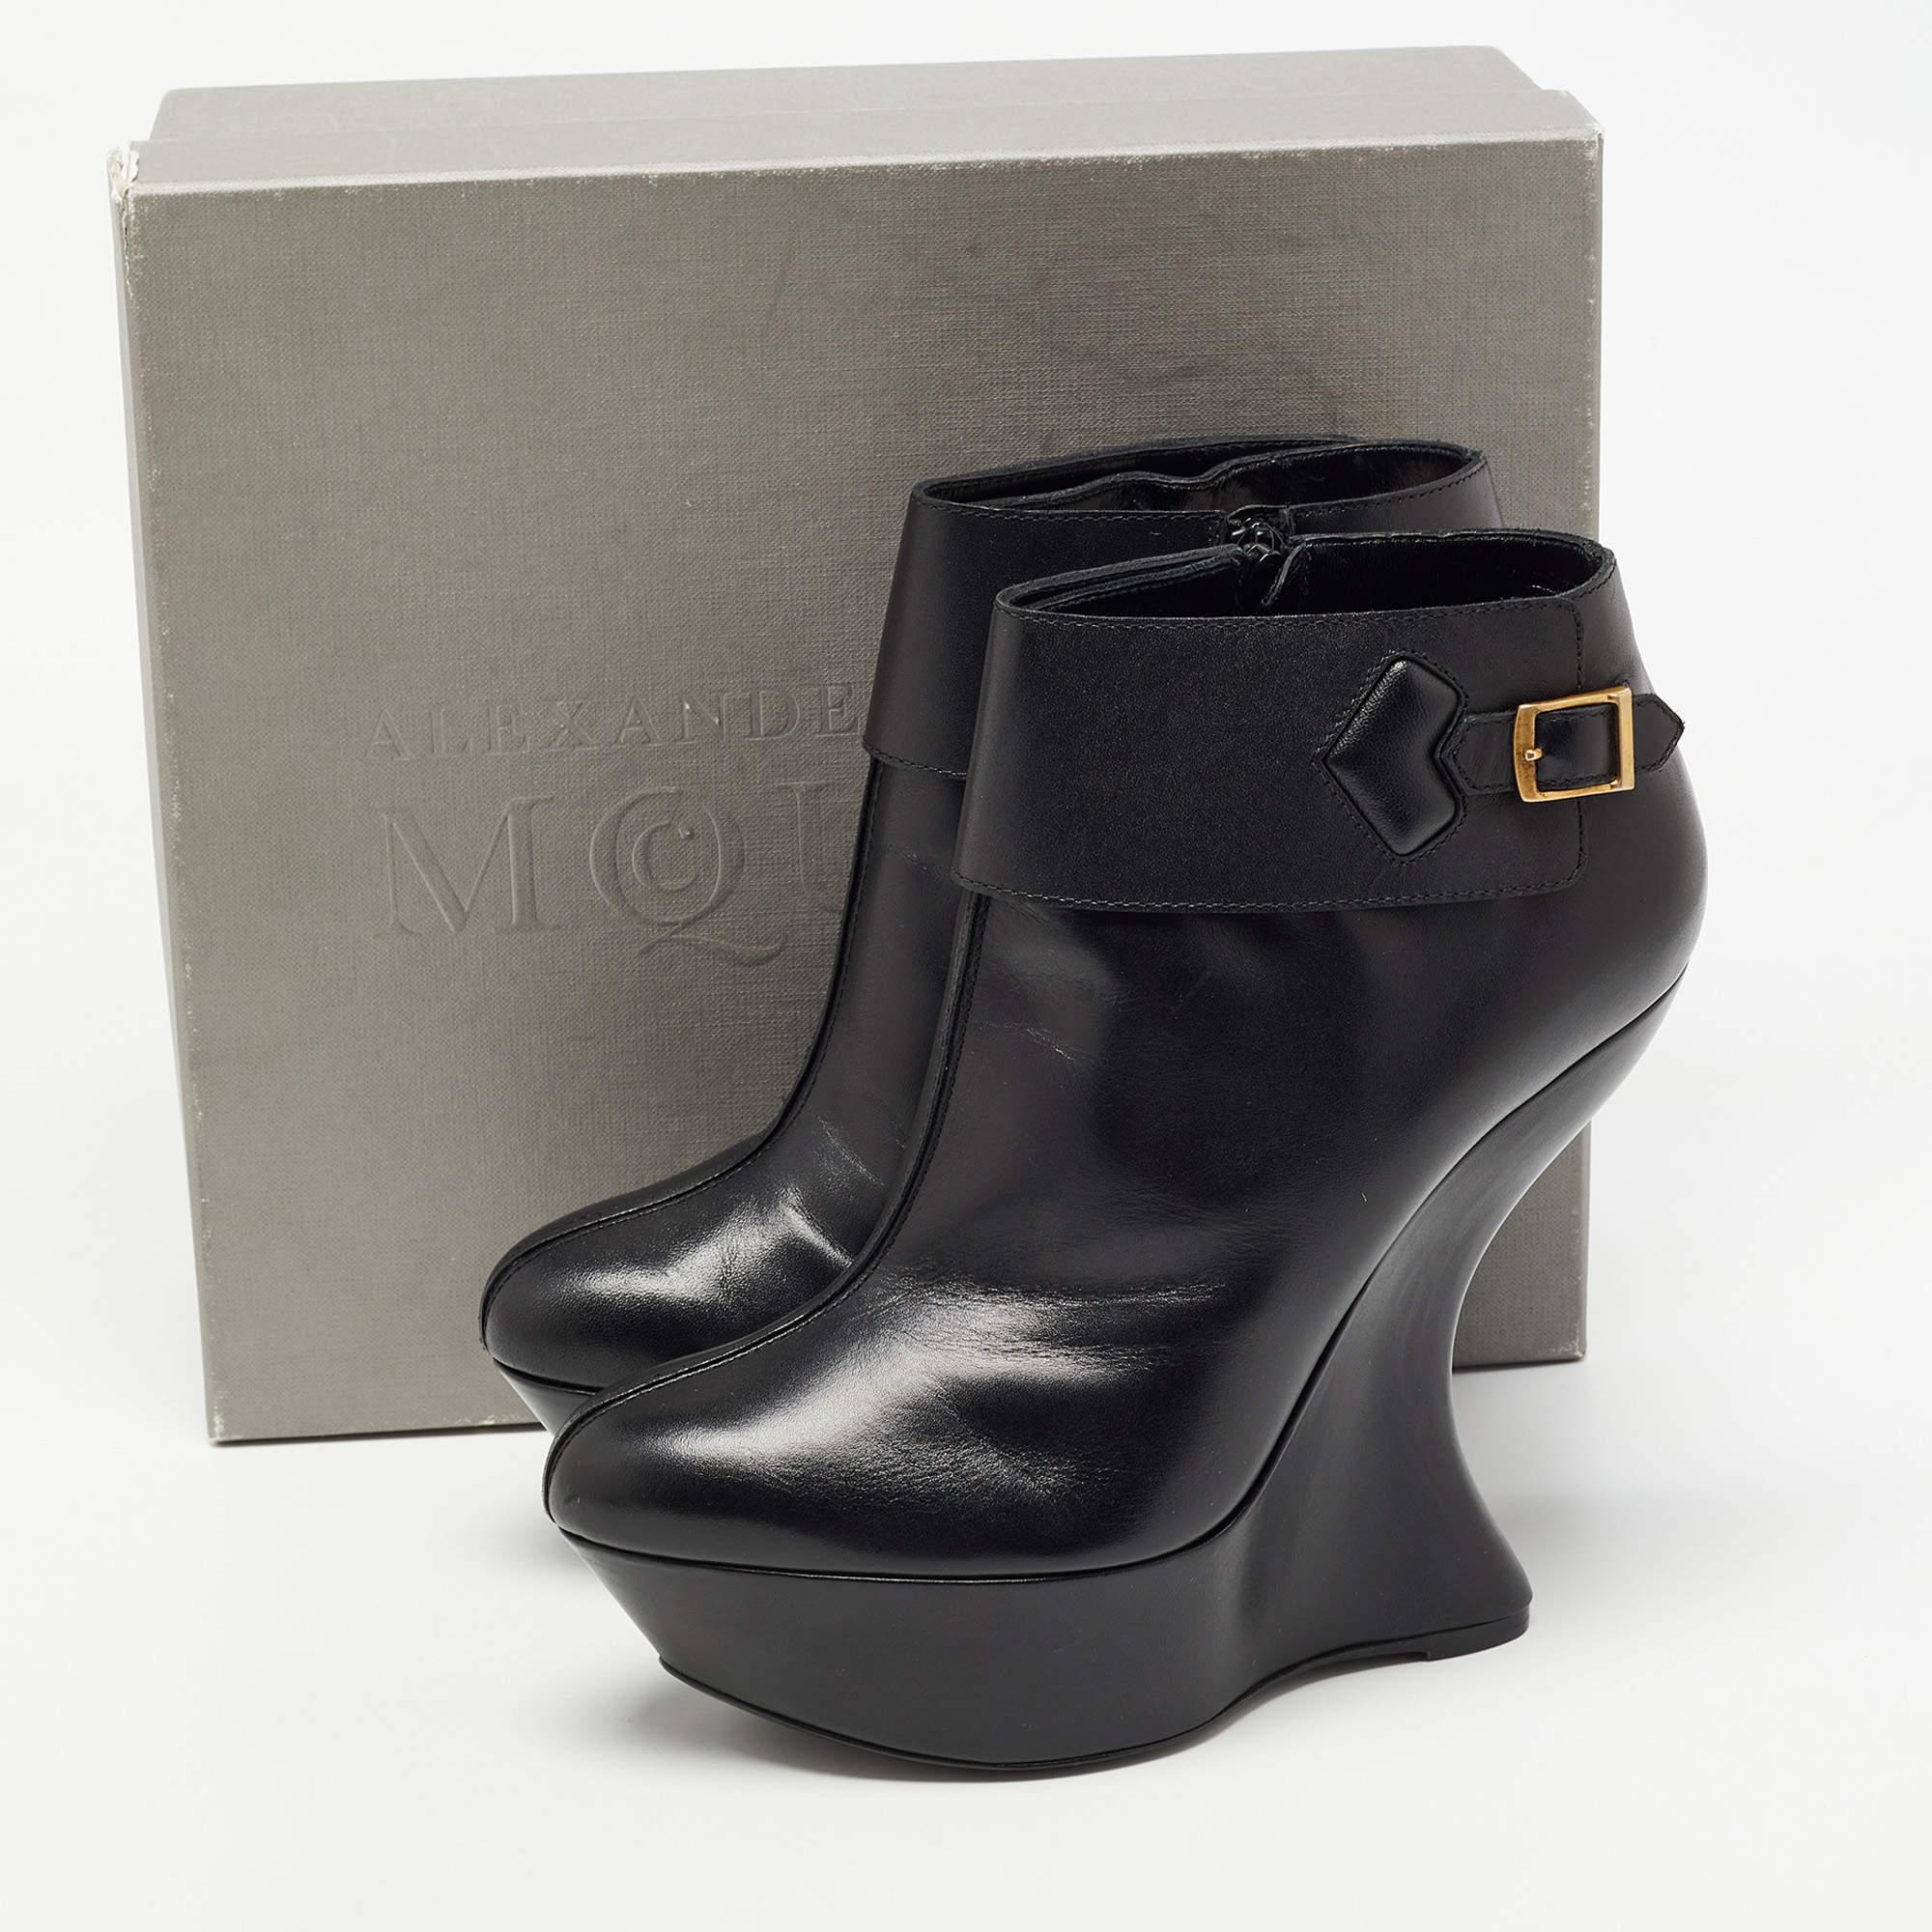 Alexander McQueen Black Leather Curved Heel Ankle Length Boots Size 40 7